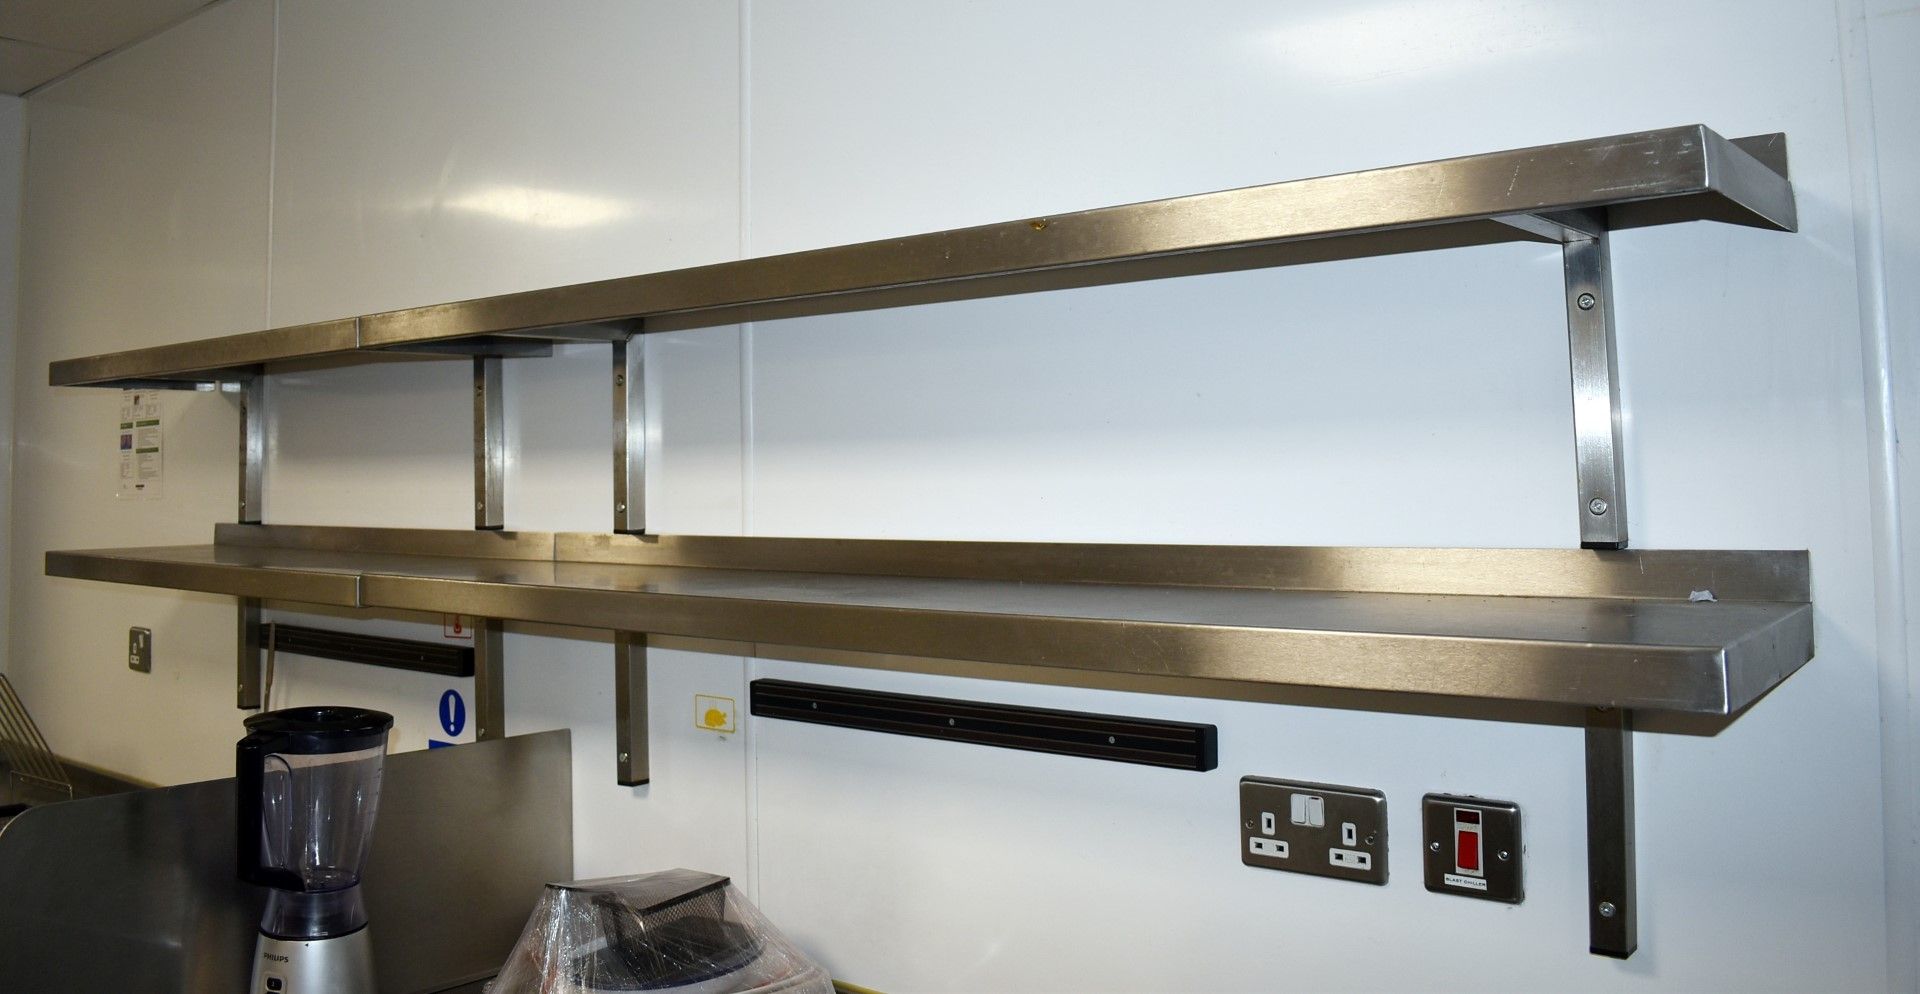 6 x Stainless Steel Wall Mounted Shelves With Mounting Brackets - Sizes W57/W104/W156 cms 2 of Each